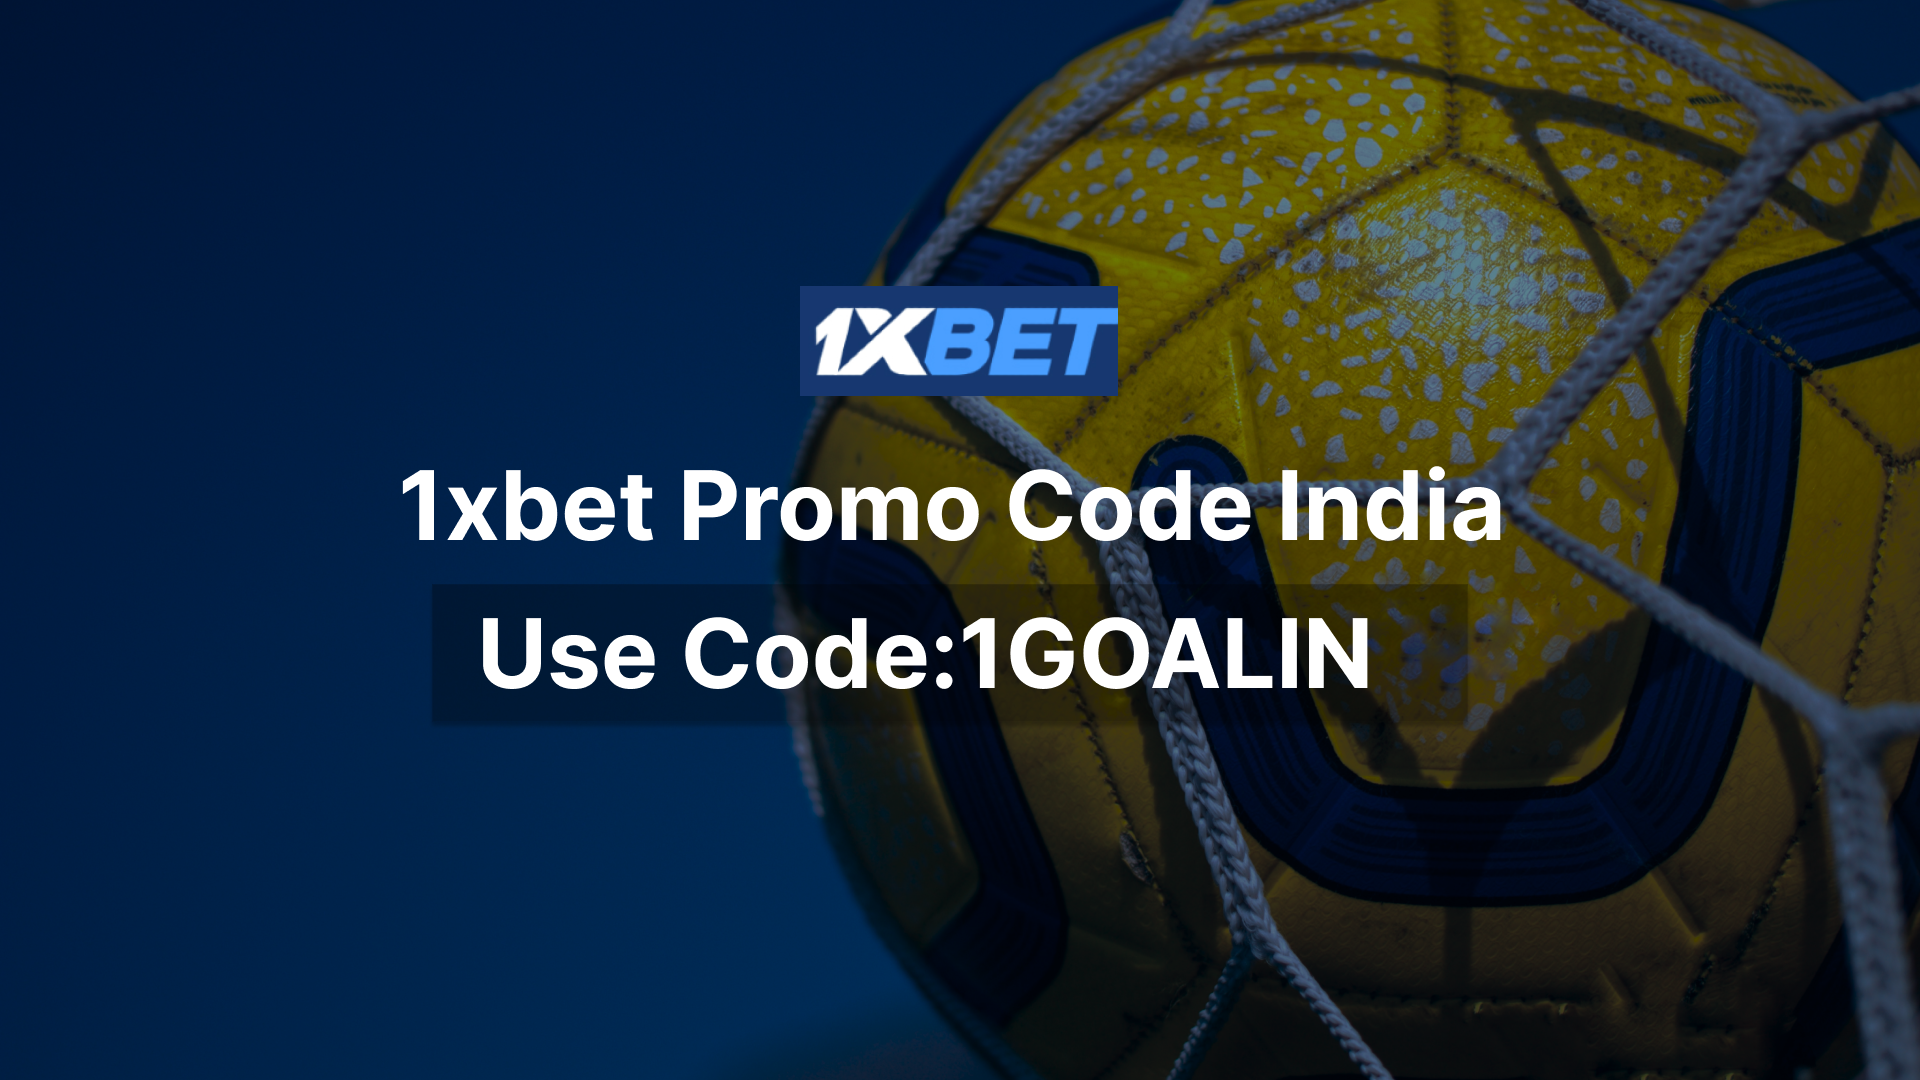 Building Relationships With 1xbet Indonesia